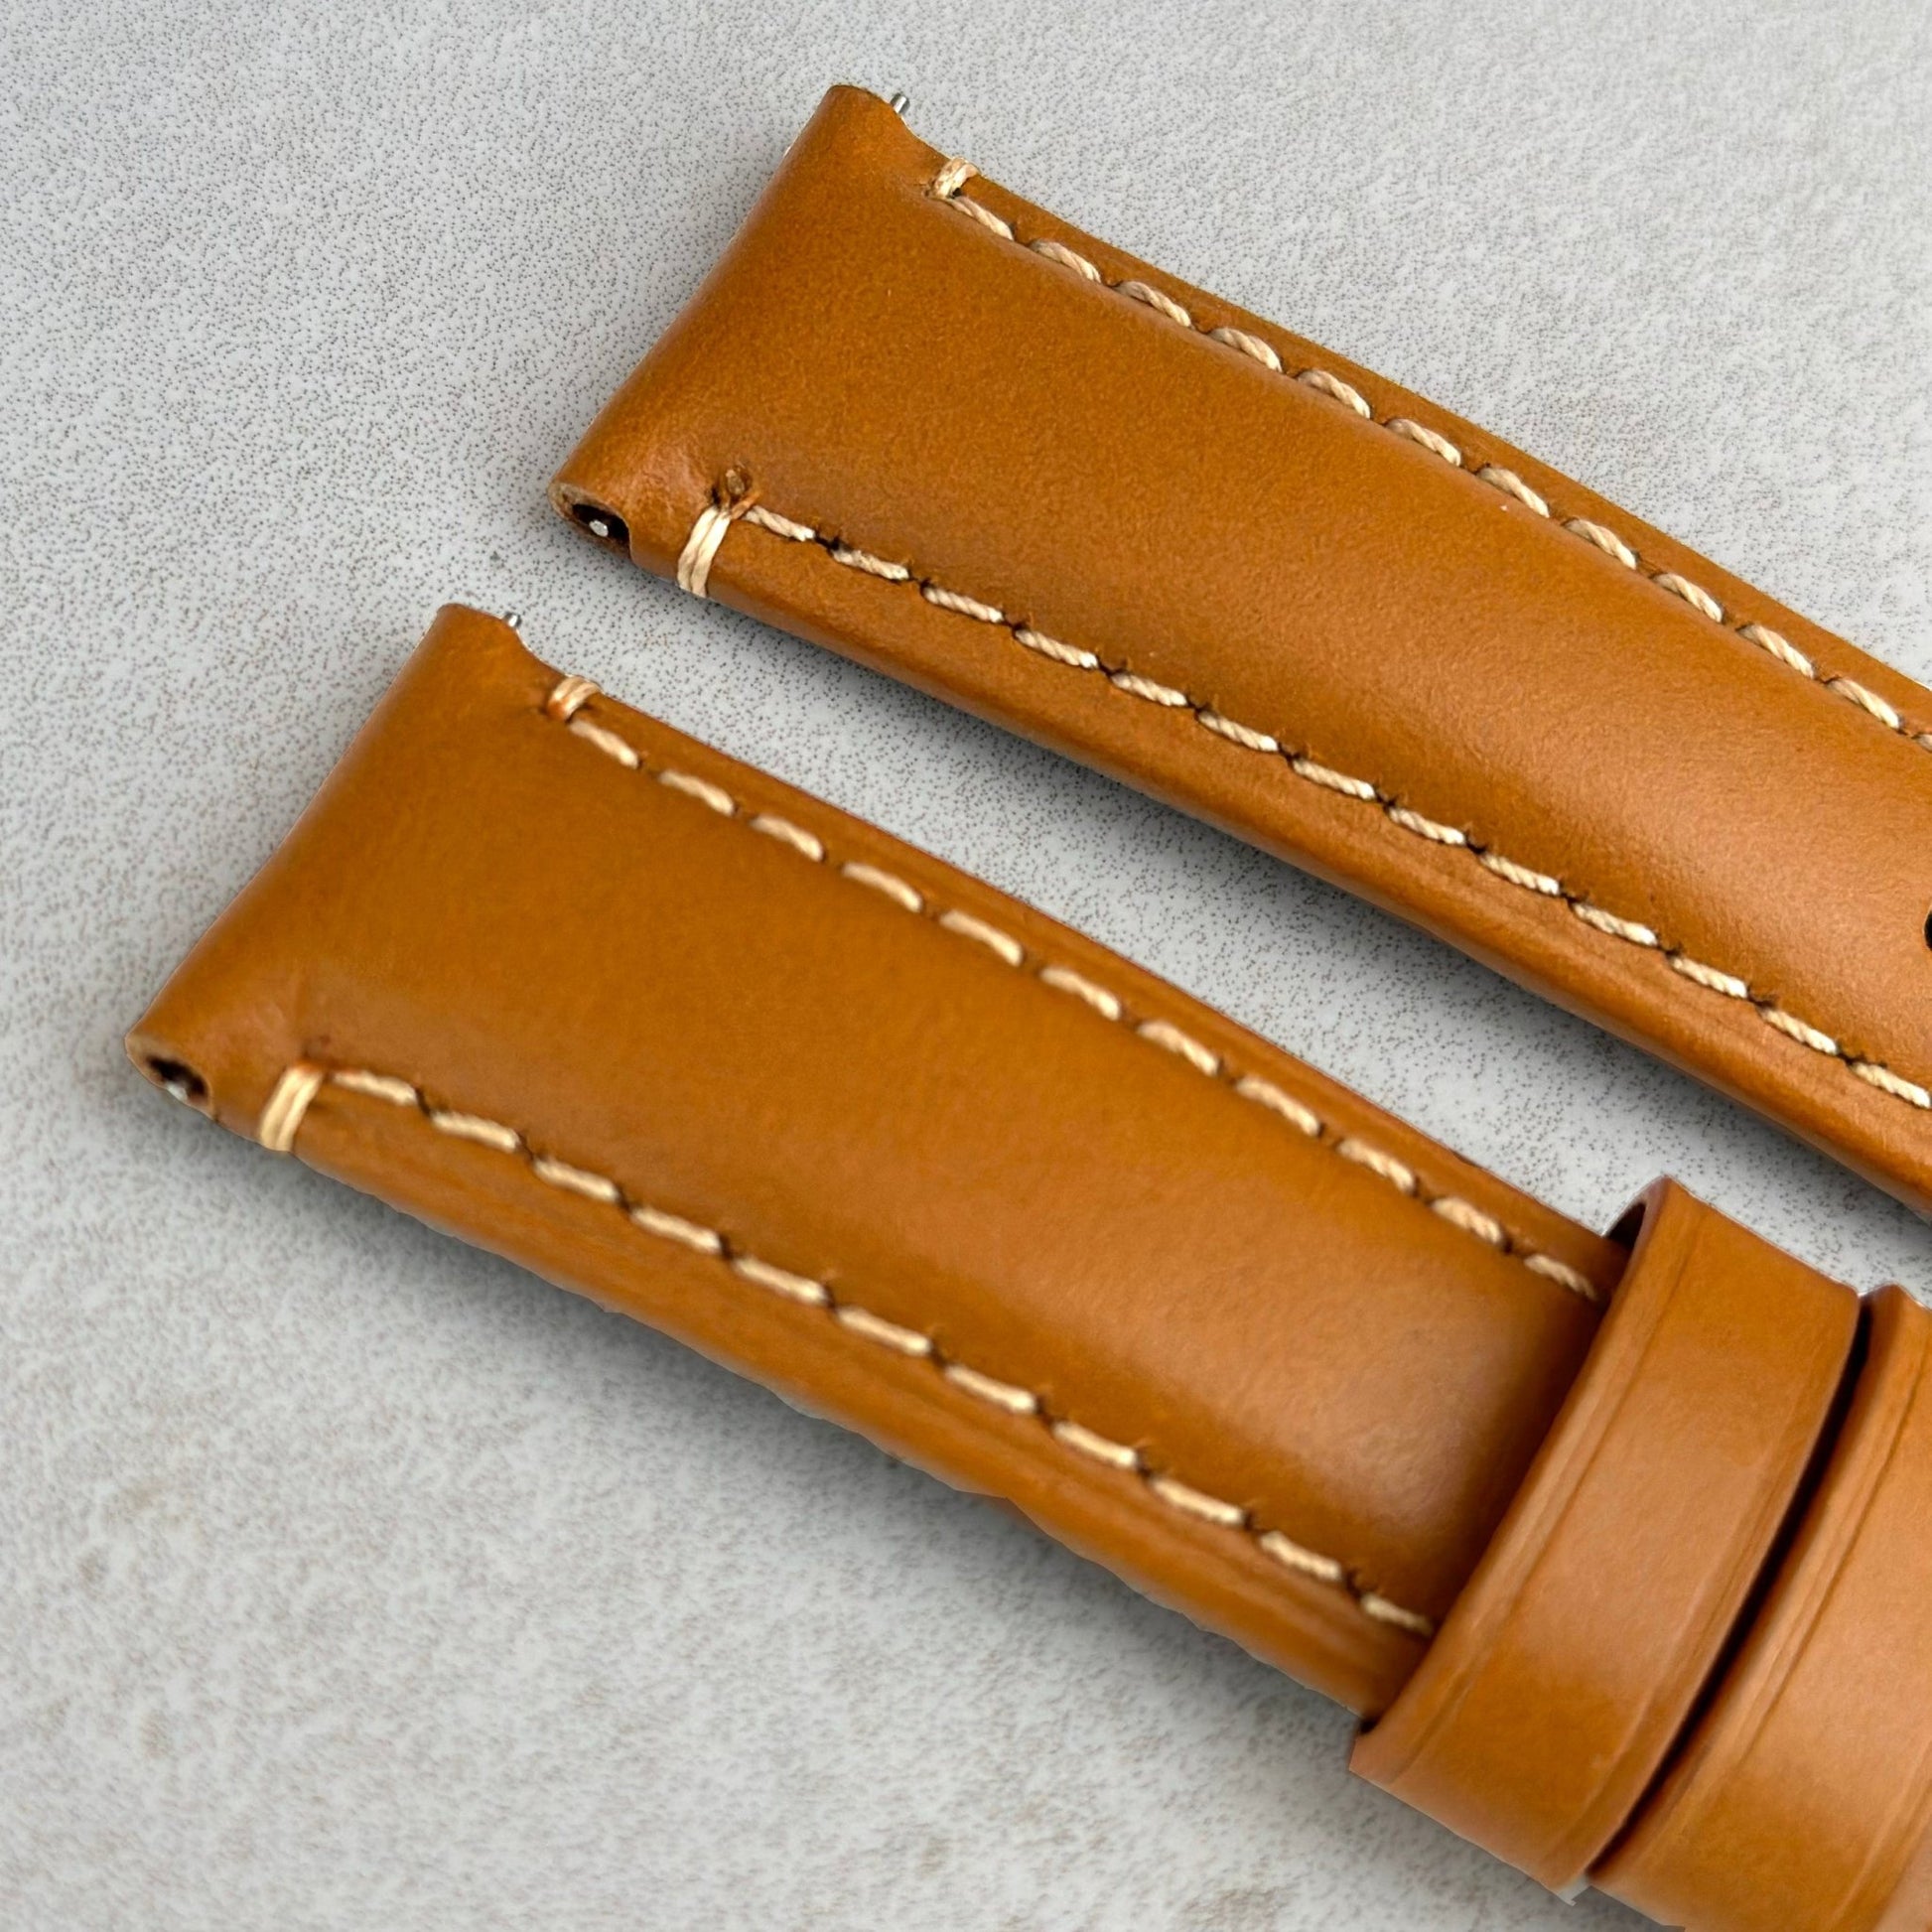 Top of the Oslo tan full grain leather watch strap. Padded leather watch strap. Watch And Strap